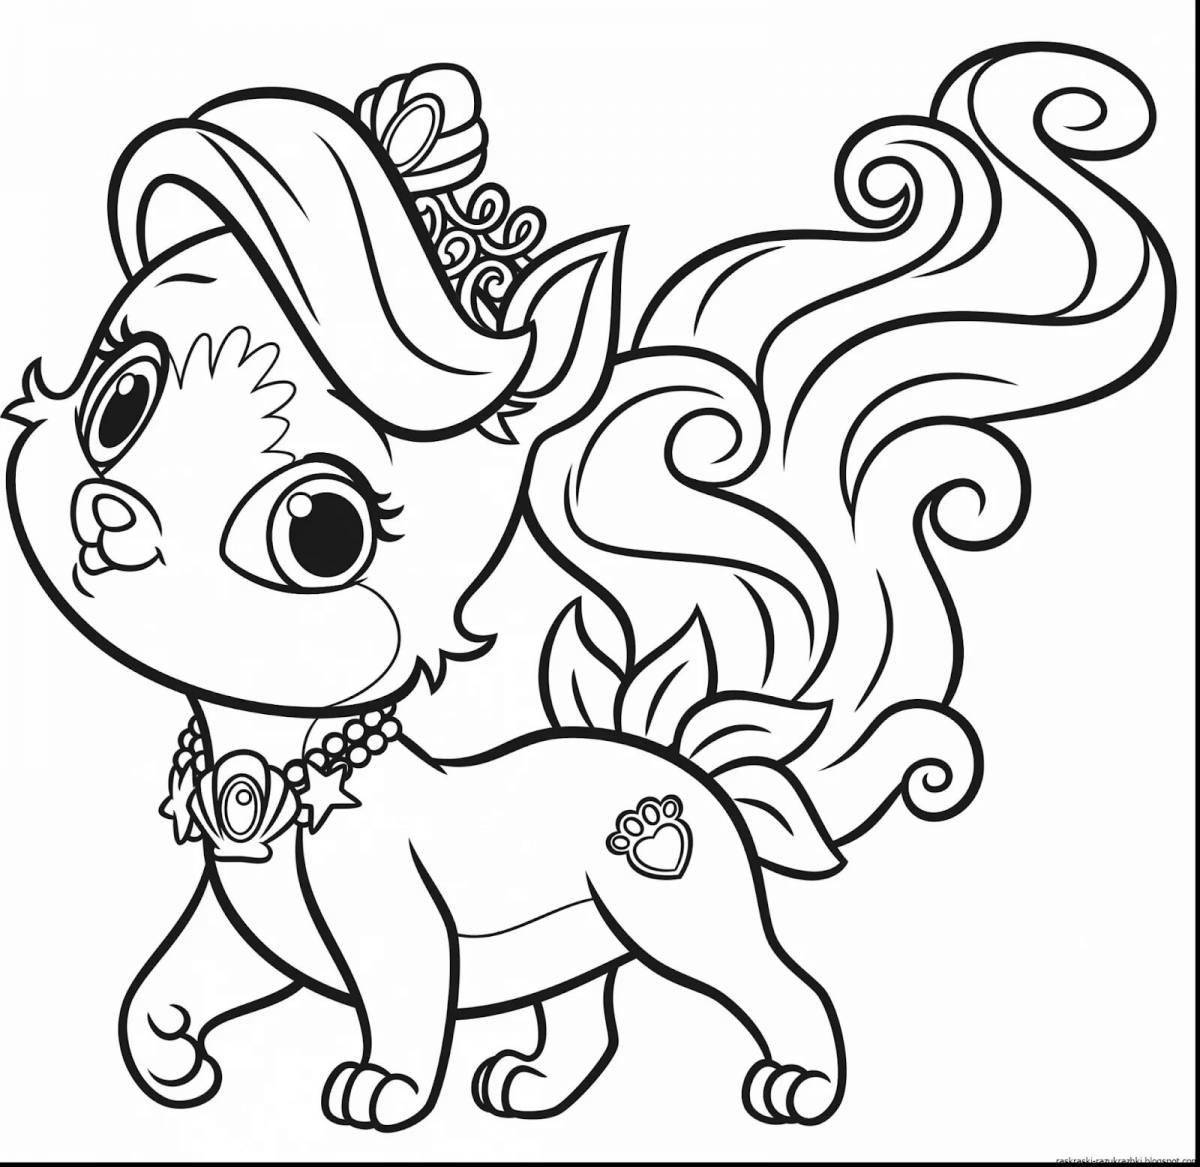 Coloring page quirky unicorn dog